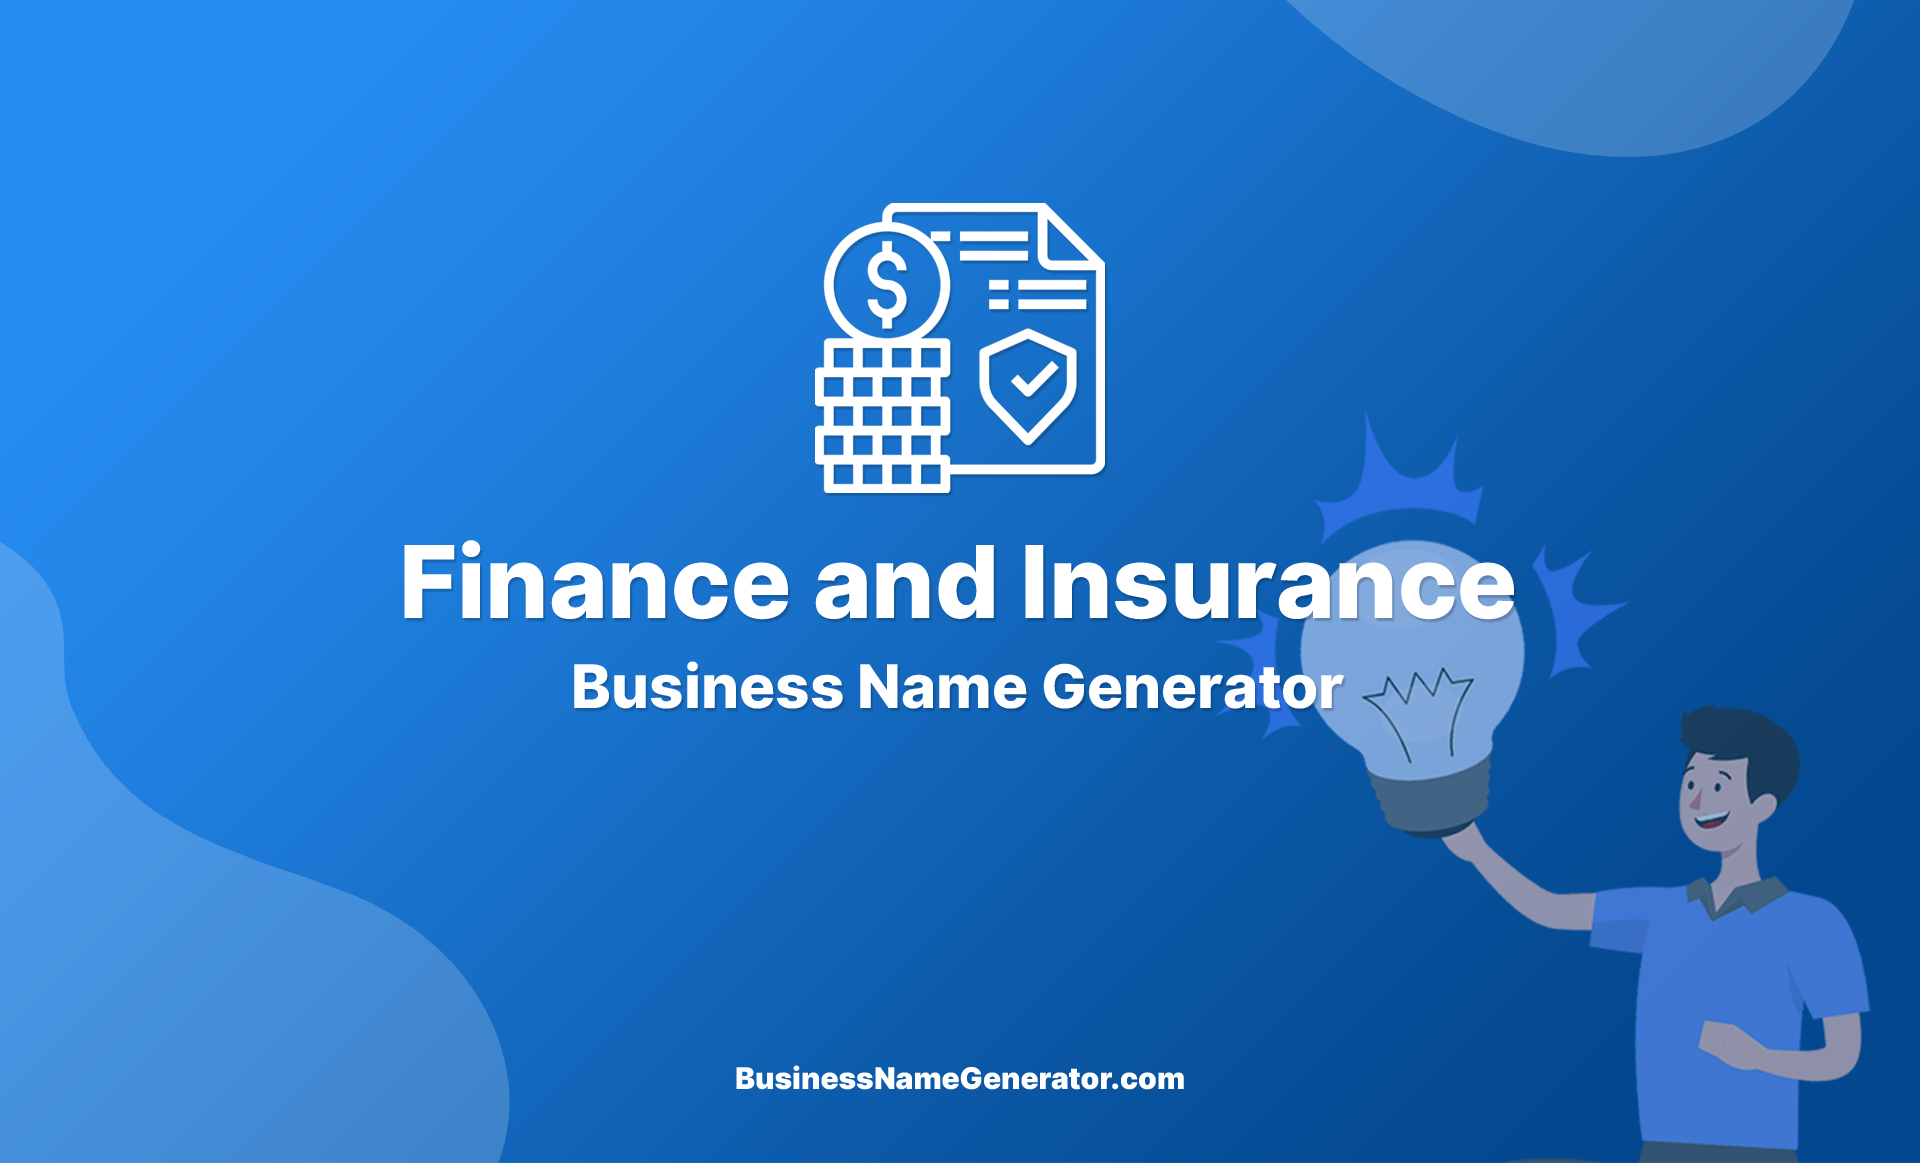 Finance and Insurance Business Name Generator